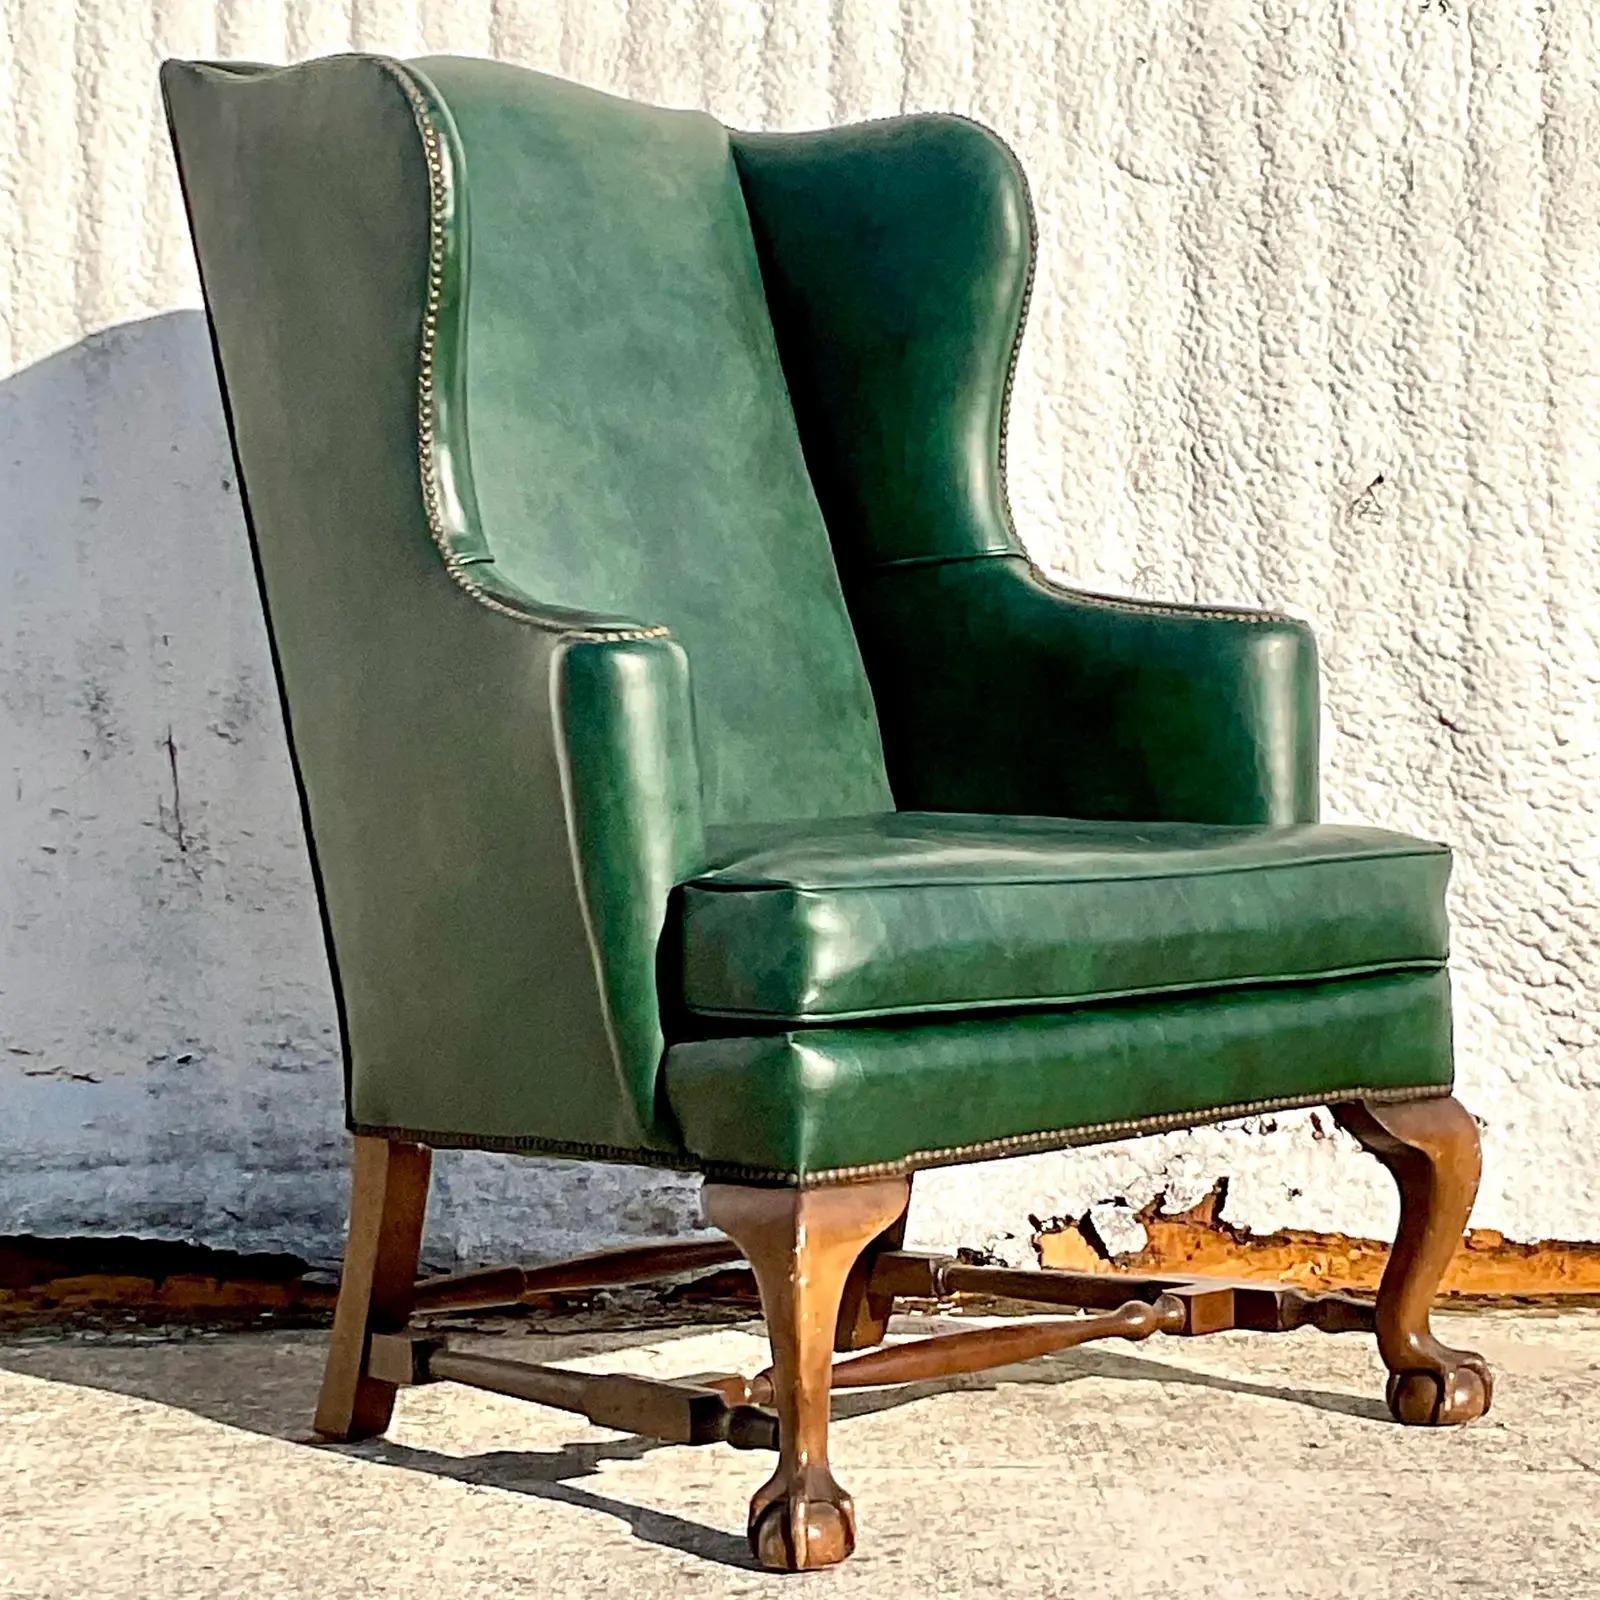 A fabulous vintage Regency wingback chairs. Made by the iconic Baker Furniture group. Chic deep green leather with nailhead trim. Imagine how beautiful in the corner of your library! Acquired from a Palm Beach estate.